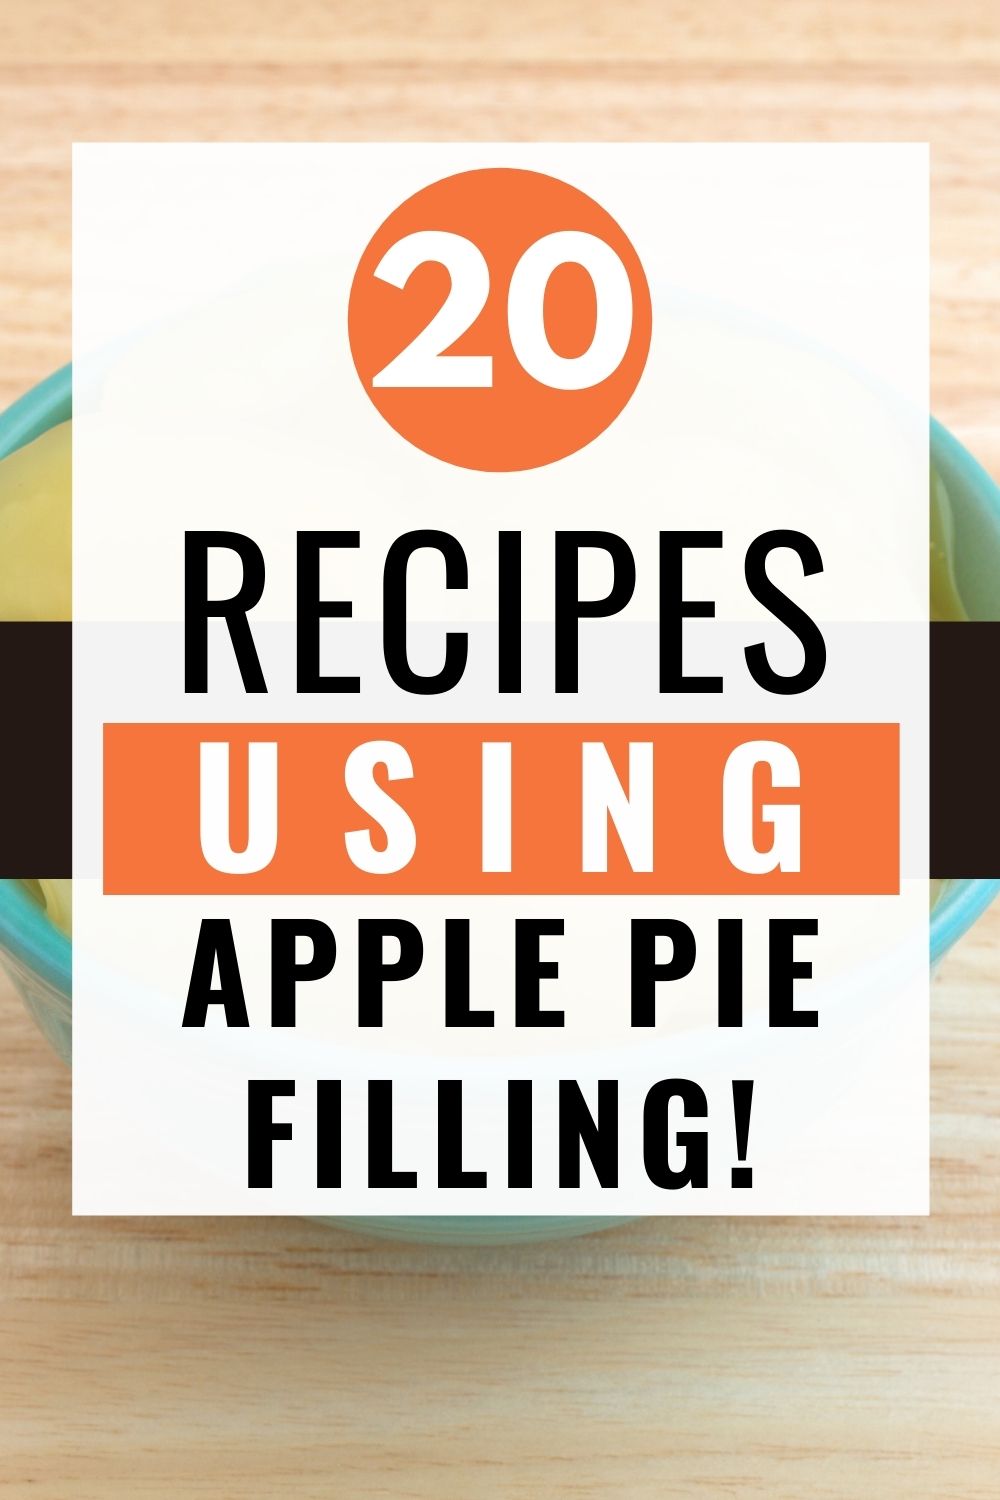 These apple pie filling recipes are very easy to make. They use canned pie filling since making your apple pie filling from scratch takes more time than most of us want to spend in the kitchen. Apart from being easy, these recipes are also very convenient!